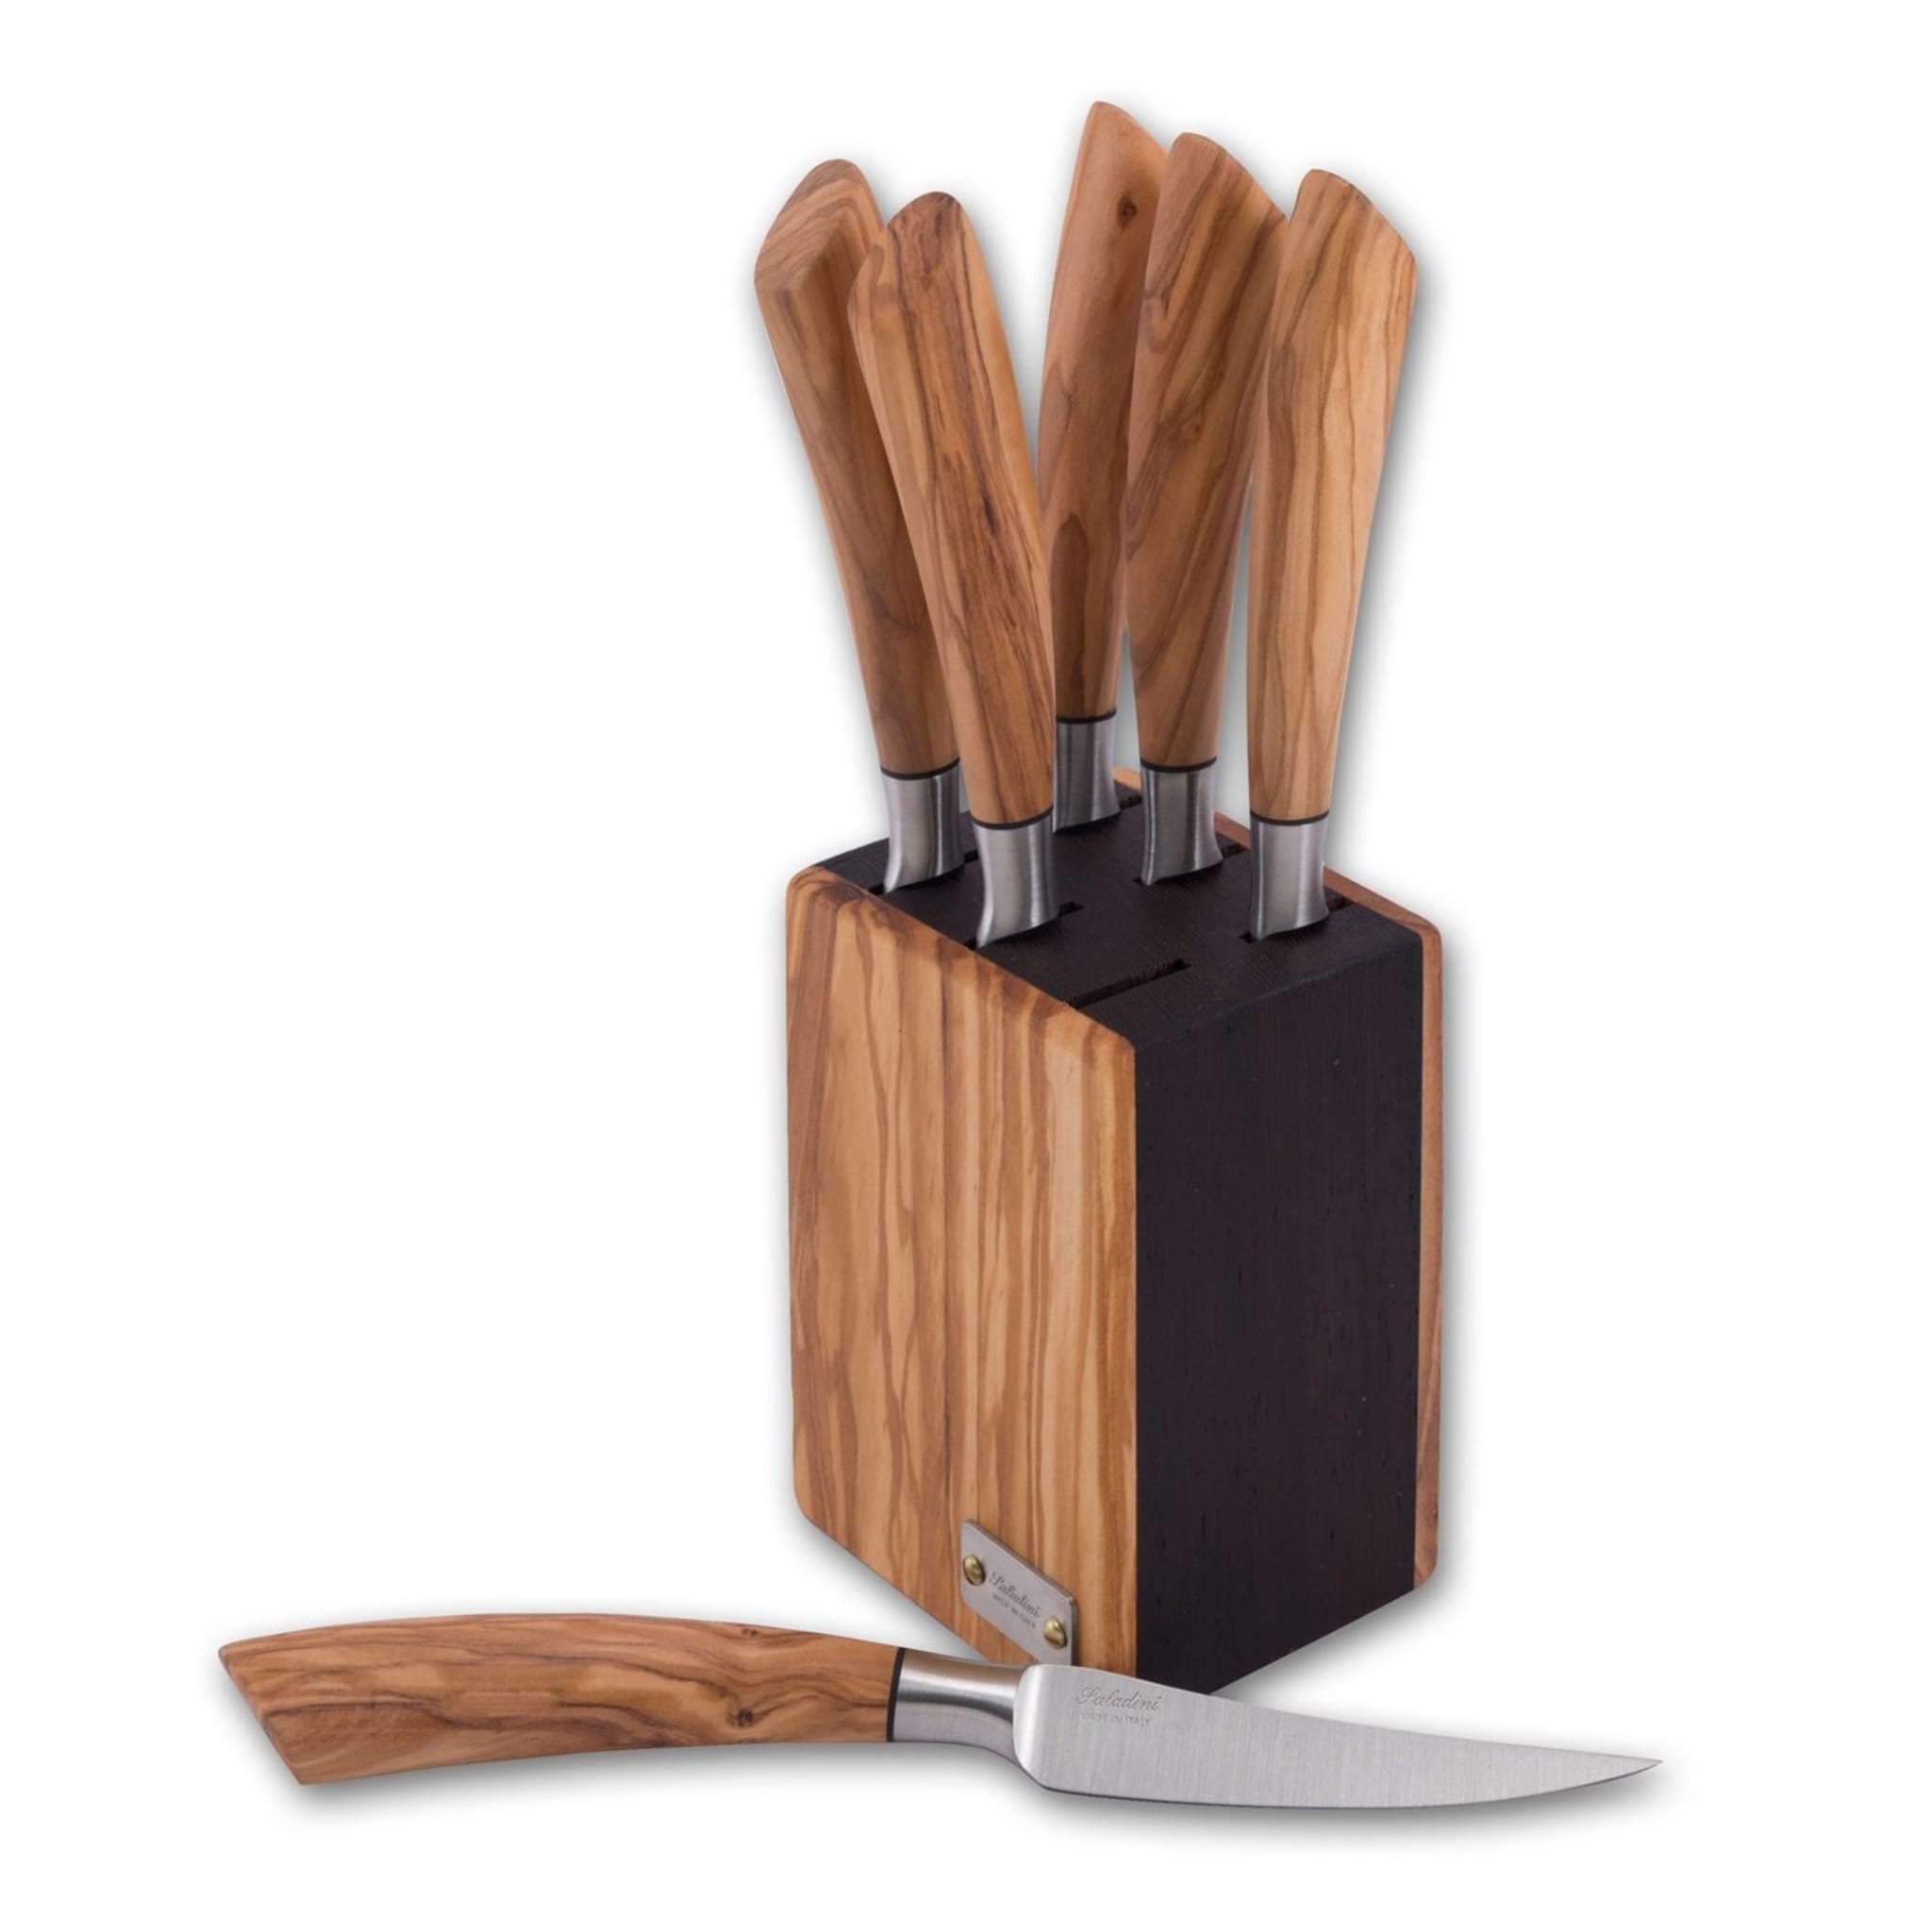 Toscano Log with Six Steak Knives - Alternative view 1